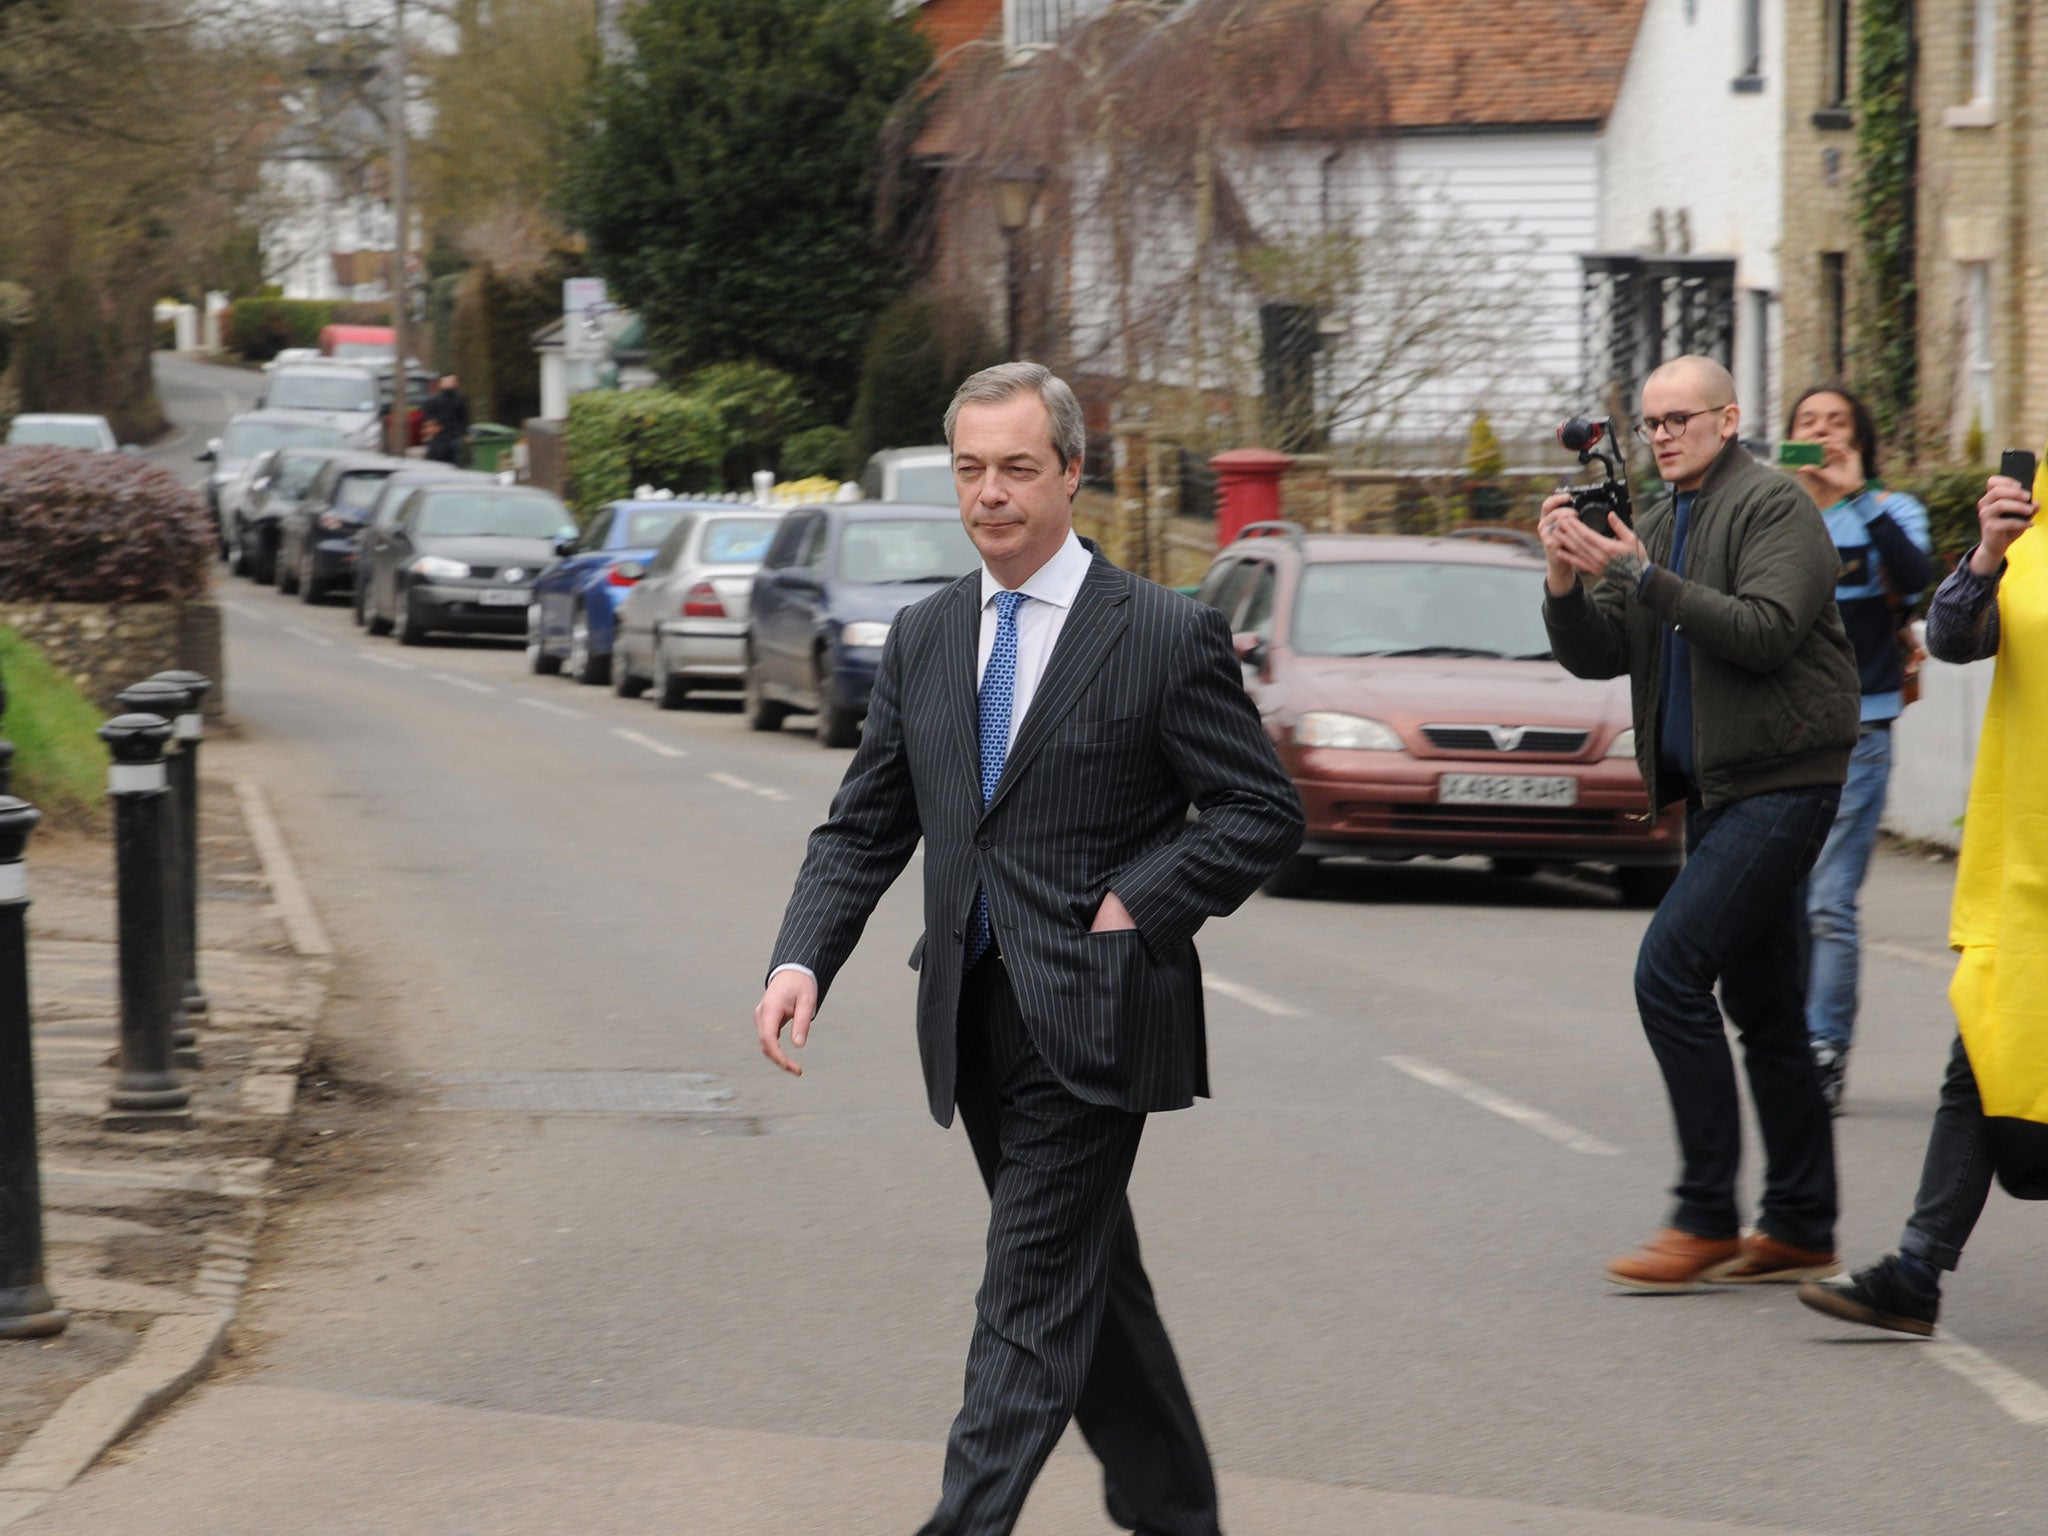 Nigel Farage is pictured leaving the pub after the invasion by protesters